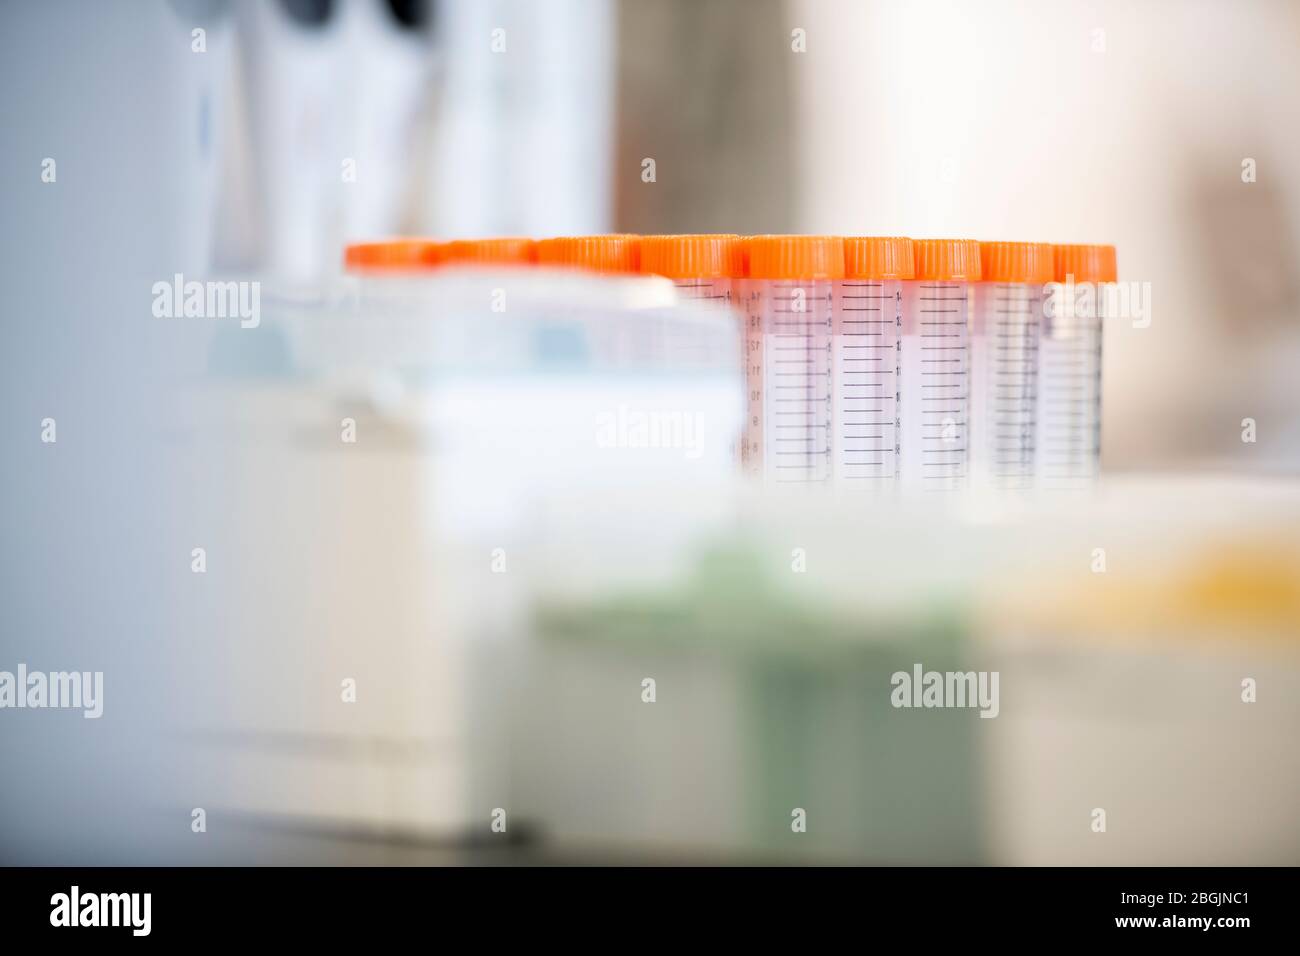 Plastic viles in a biotech science lab Stock Photo